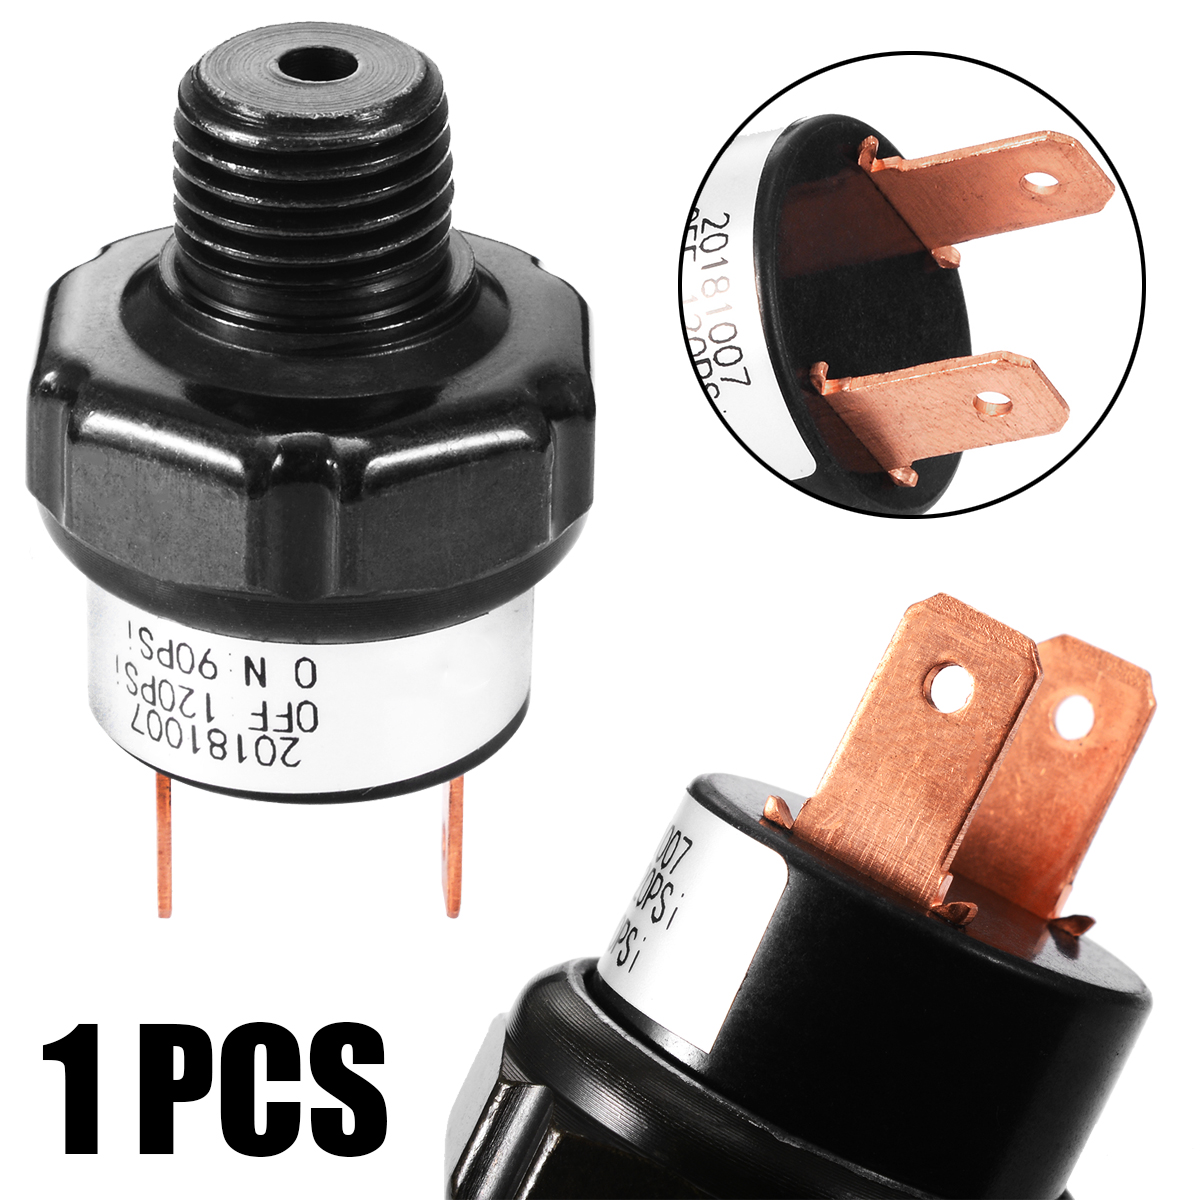 Durable Heavy Duty Air Compressor Tank Pressure Switch 90-120 PSI 12V 1/4" NPT Control Switches Electrical Equipment Mayitr